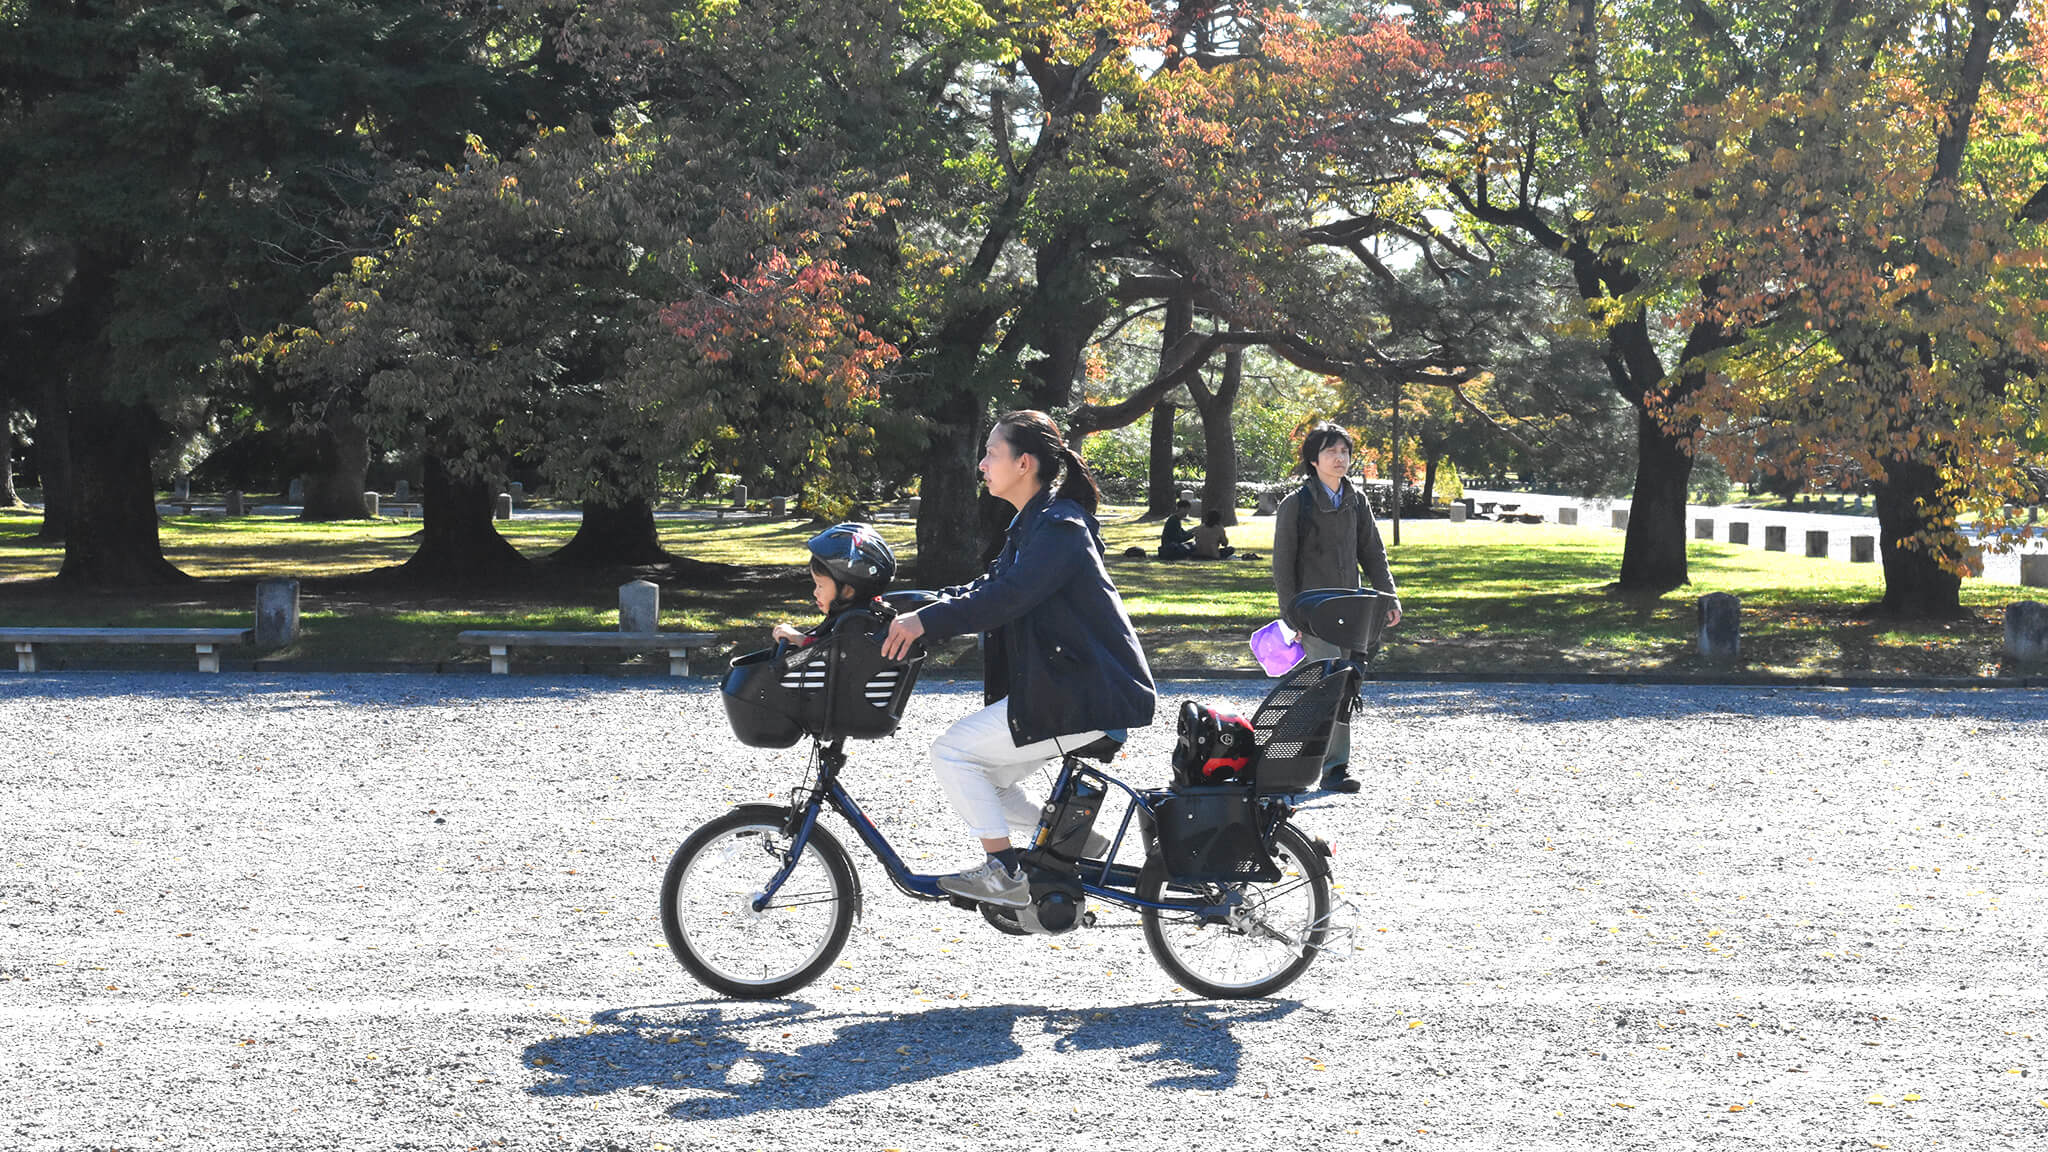 Mother and child on e-bike in Japan